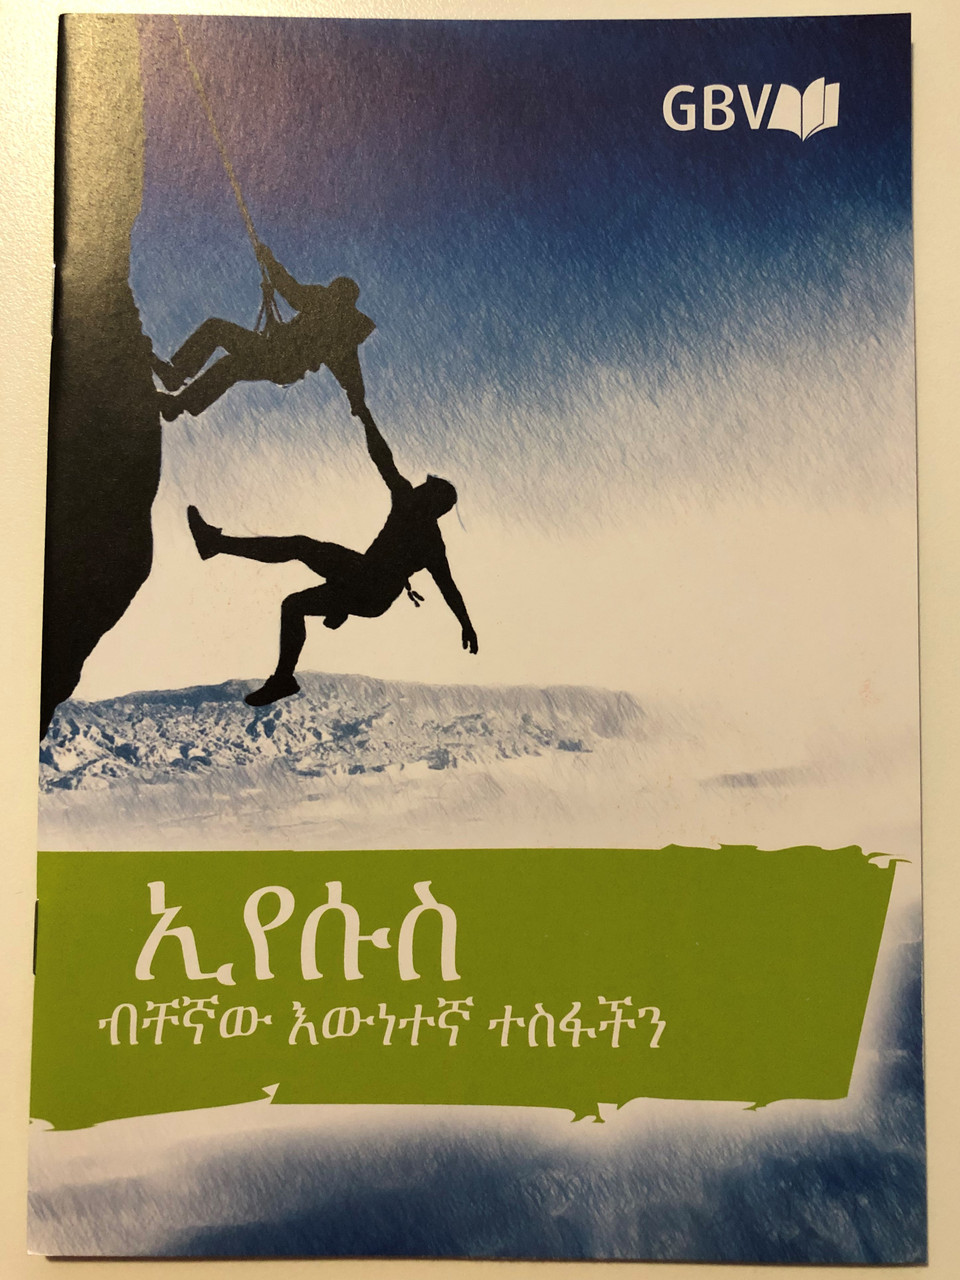 Jesus our only real hope Amharic edition / Text by Manfred Paul / Gute  Botschaft Verlag 2020 / Paperback / GBV 115 4560 - bibleinmylanguage